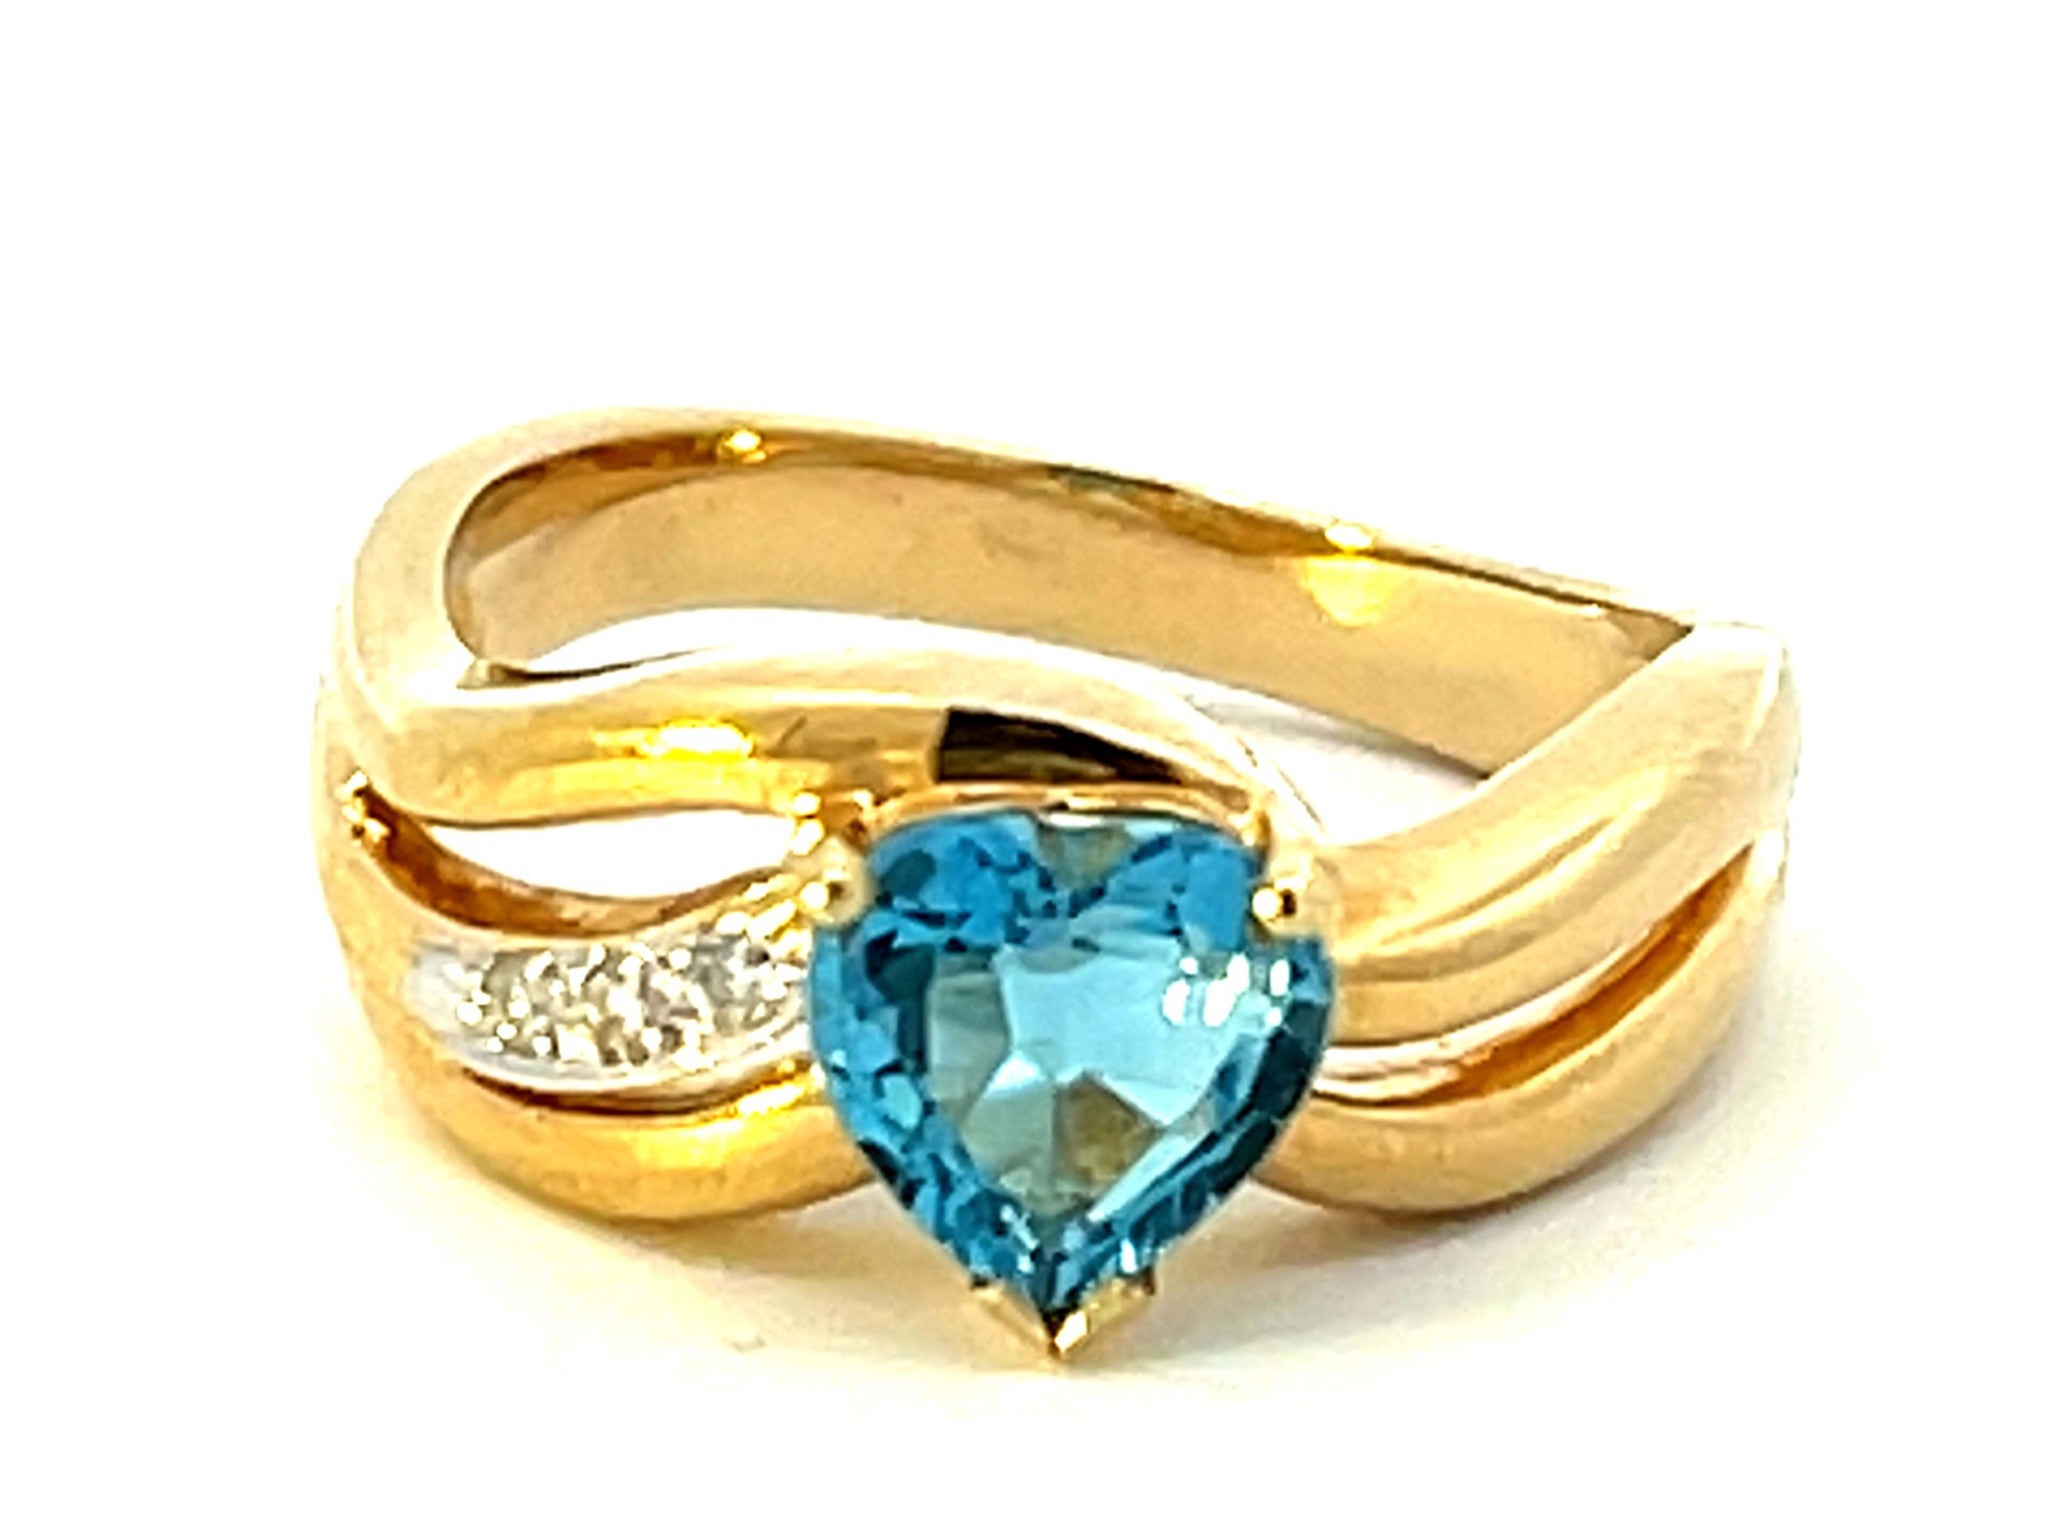 Heart Shaped Sky Blue Topaz and Diamond Ring in 14k Yellow Gold